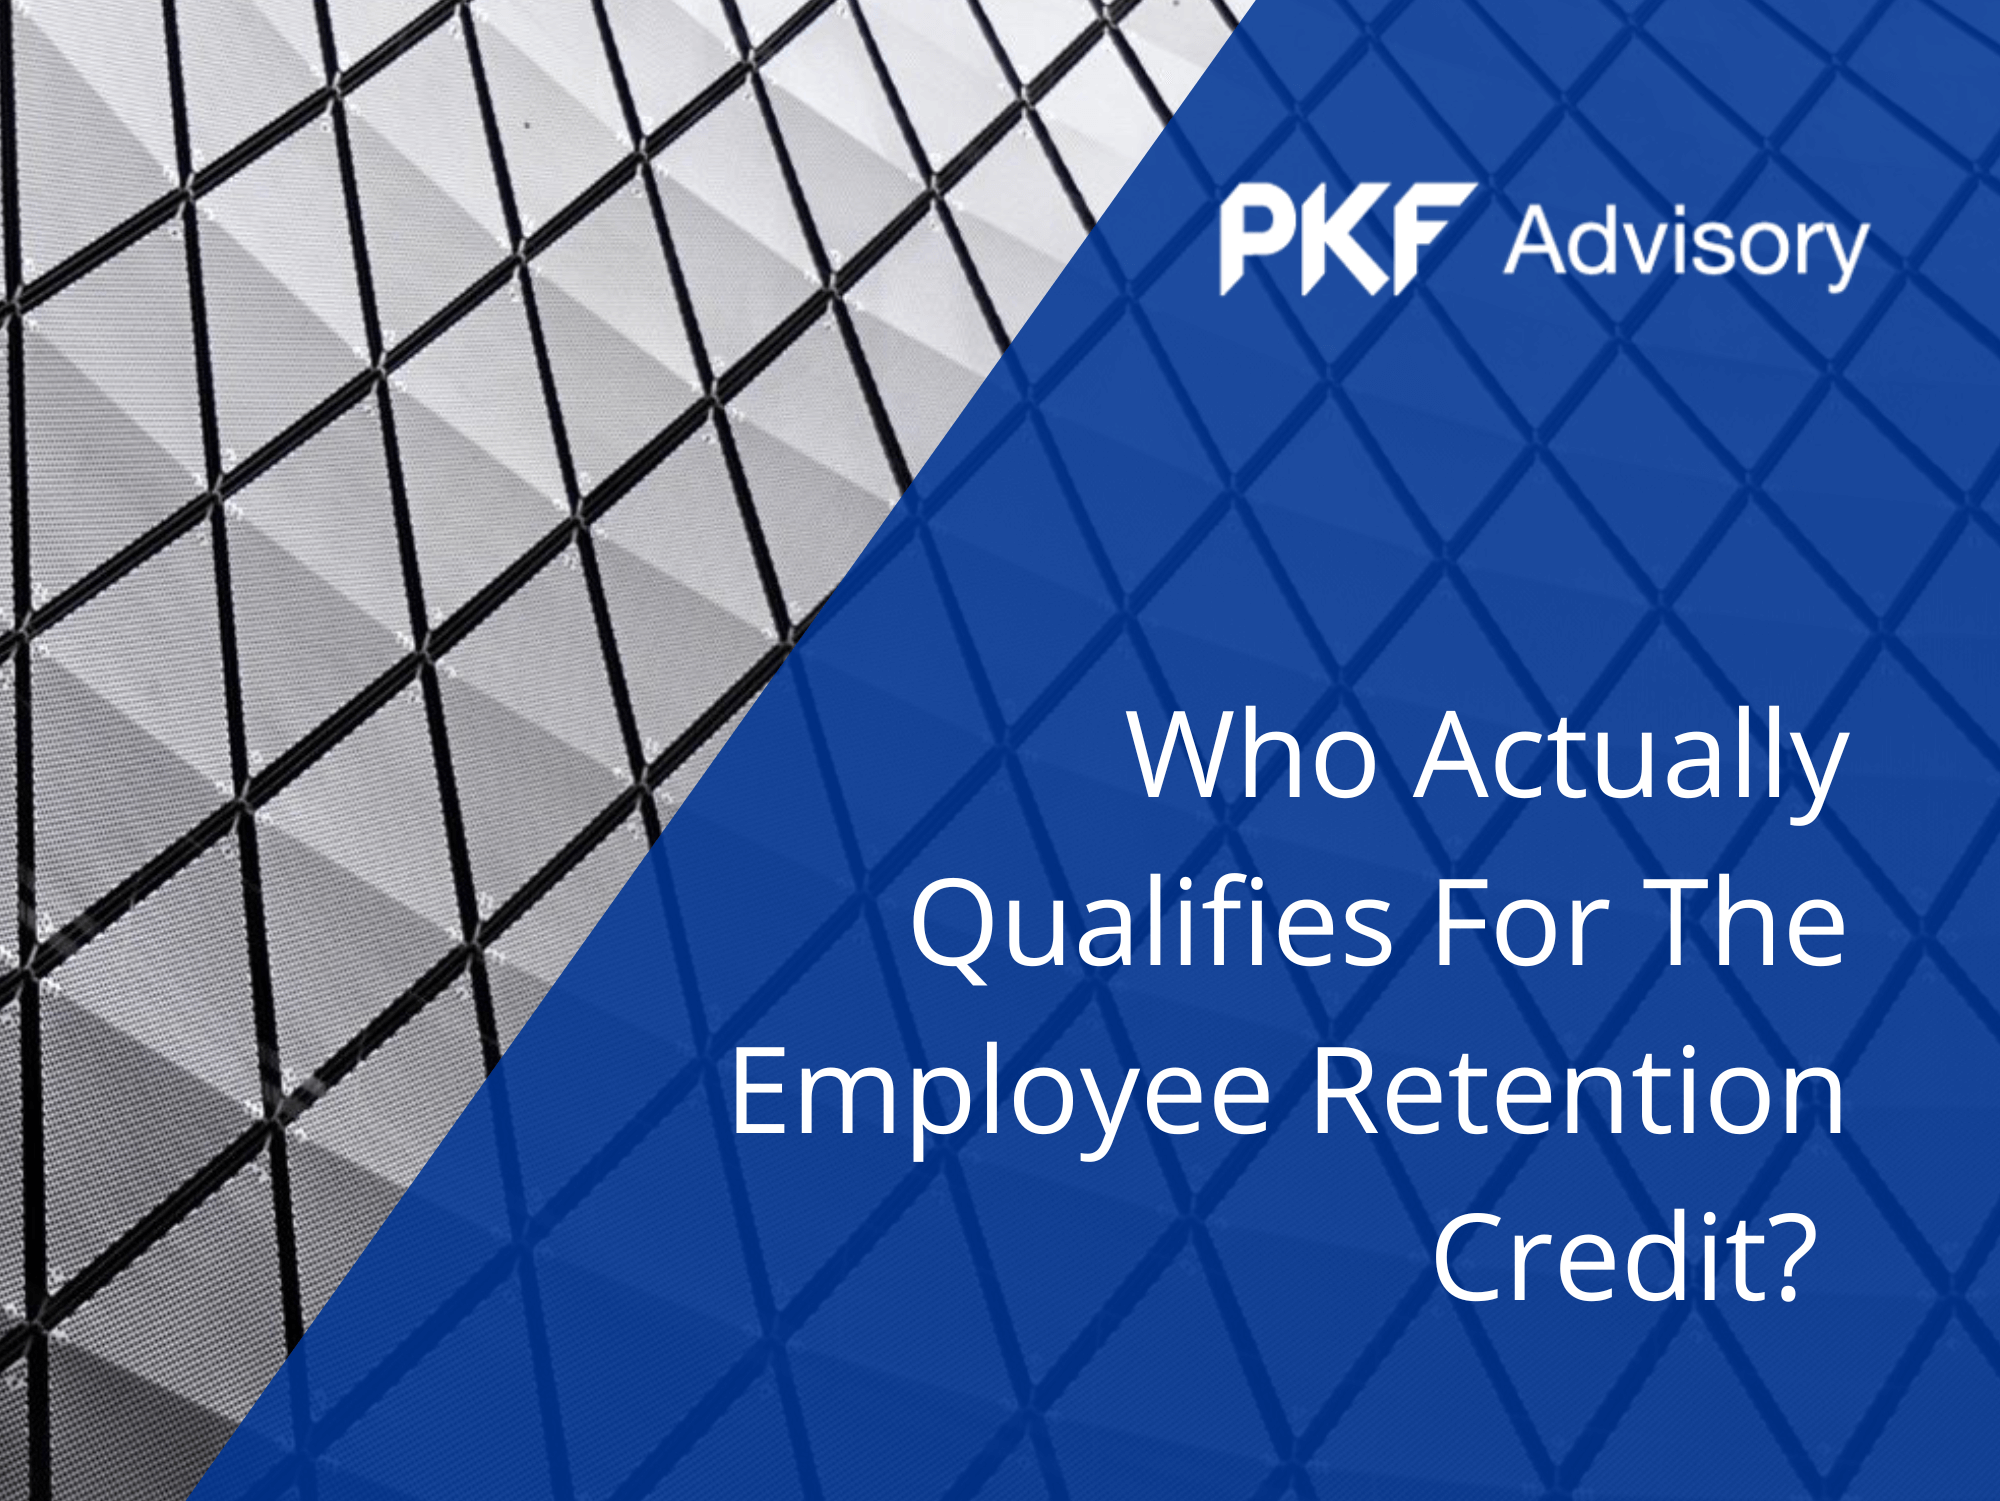 PKF Advisory - Who Actually Qualifies for the Employee Retention Credit